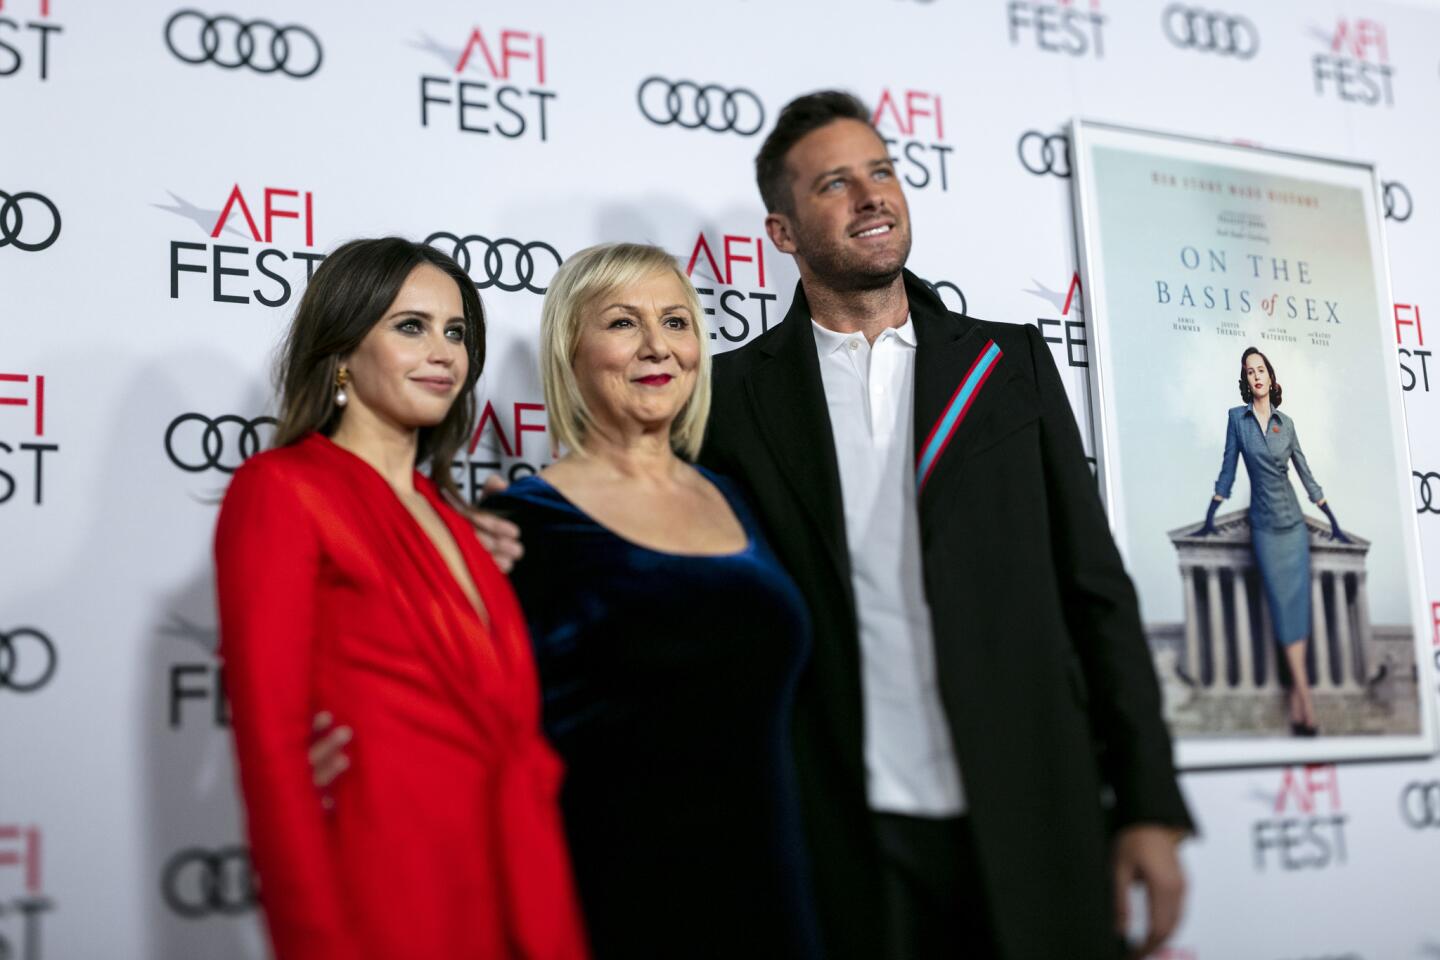 "On the Basis of Sex" at the AFI Opening Gala, 2018